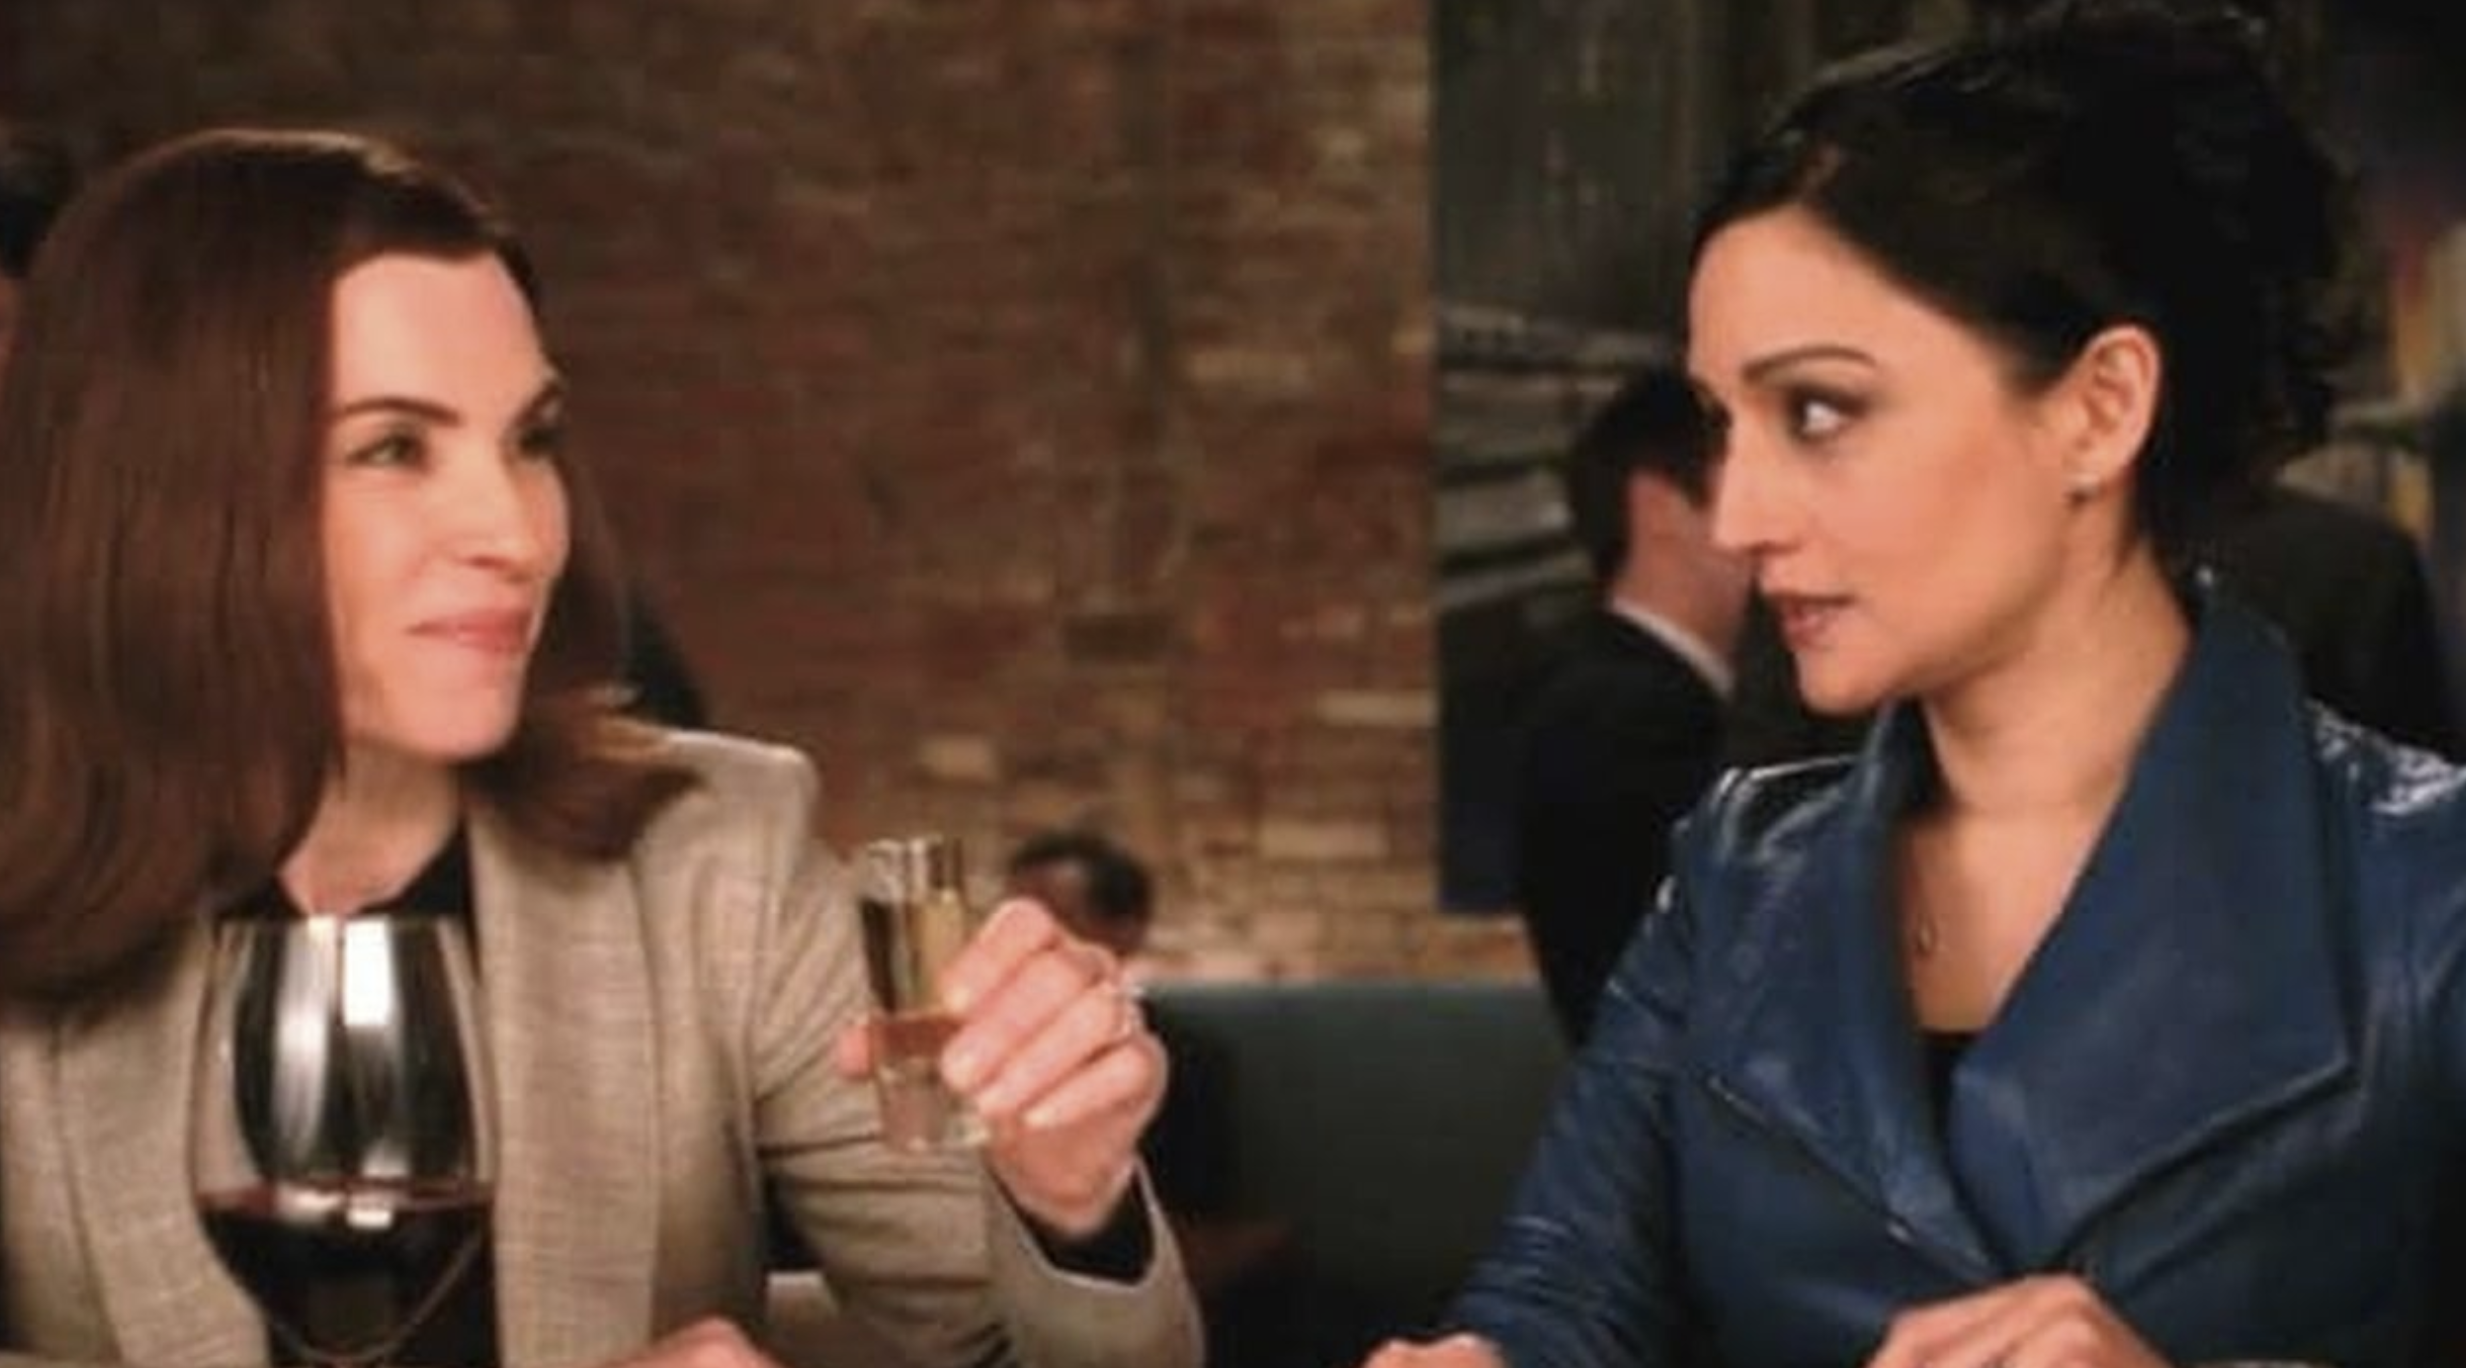 A screenshot of Julianna Margulies and Archie Panjabi sitting next to eachother at a bar in a scene from The Good Wife